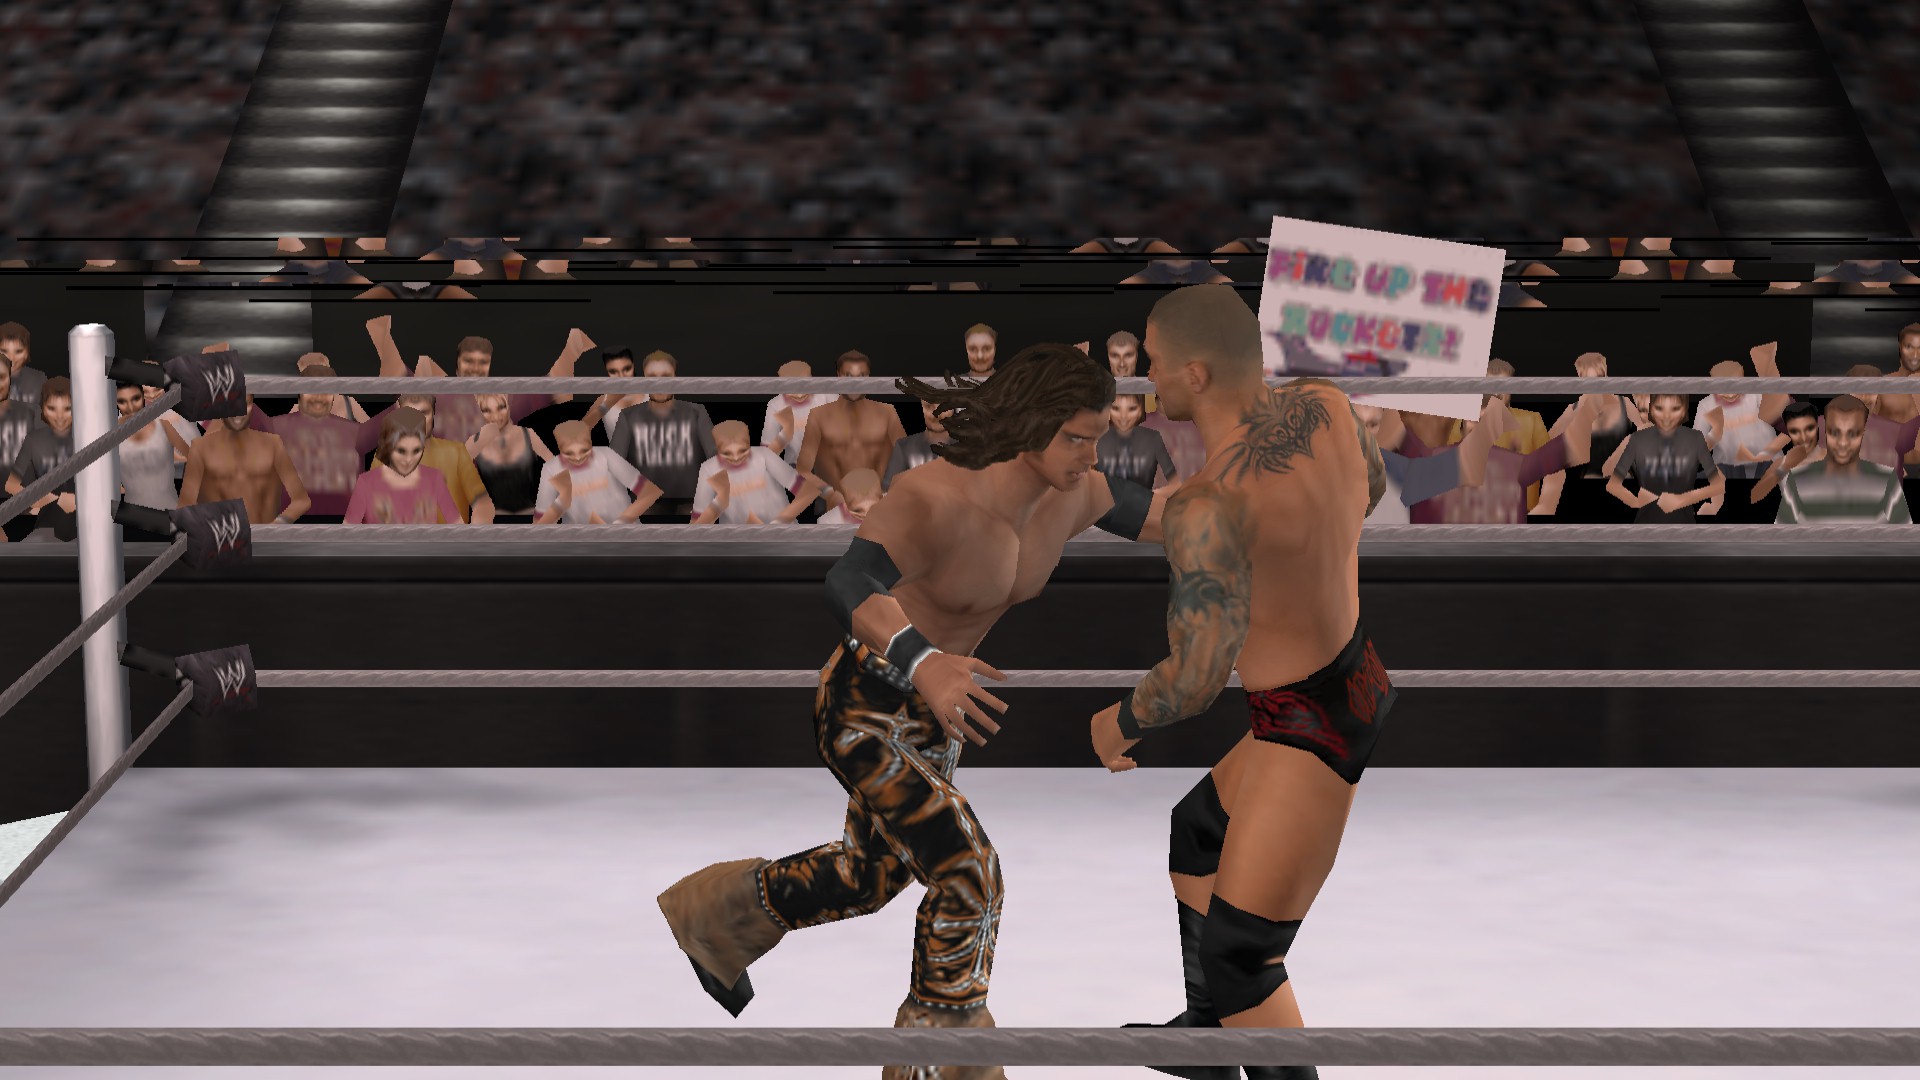 Wwe 2k11 Download For Android Ppsspp. neumes.bngp-central.org. 